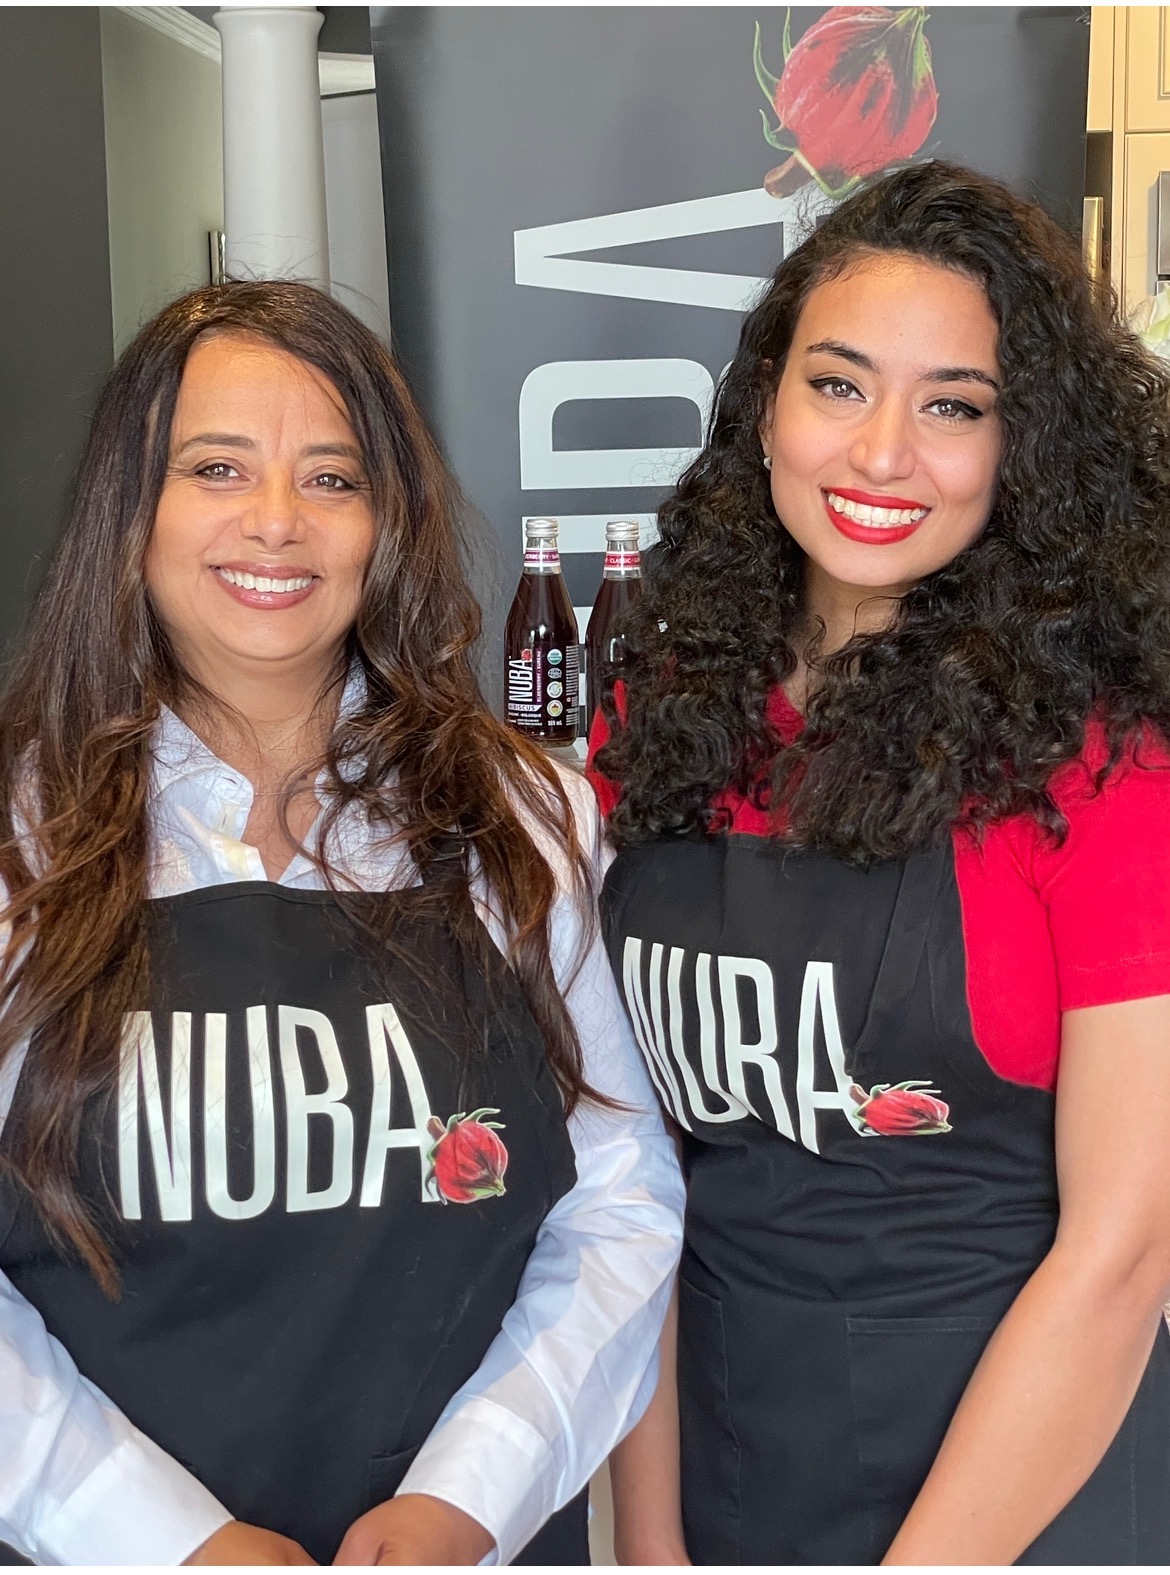 Nuba, mother daughter, women owned business, ontario made